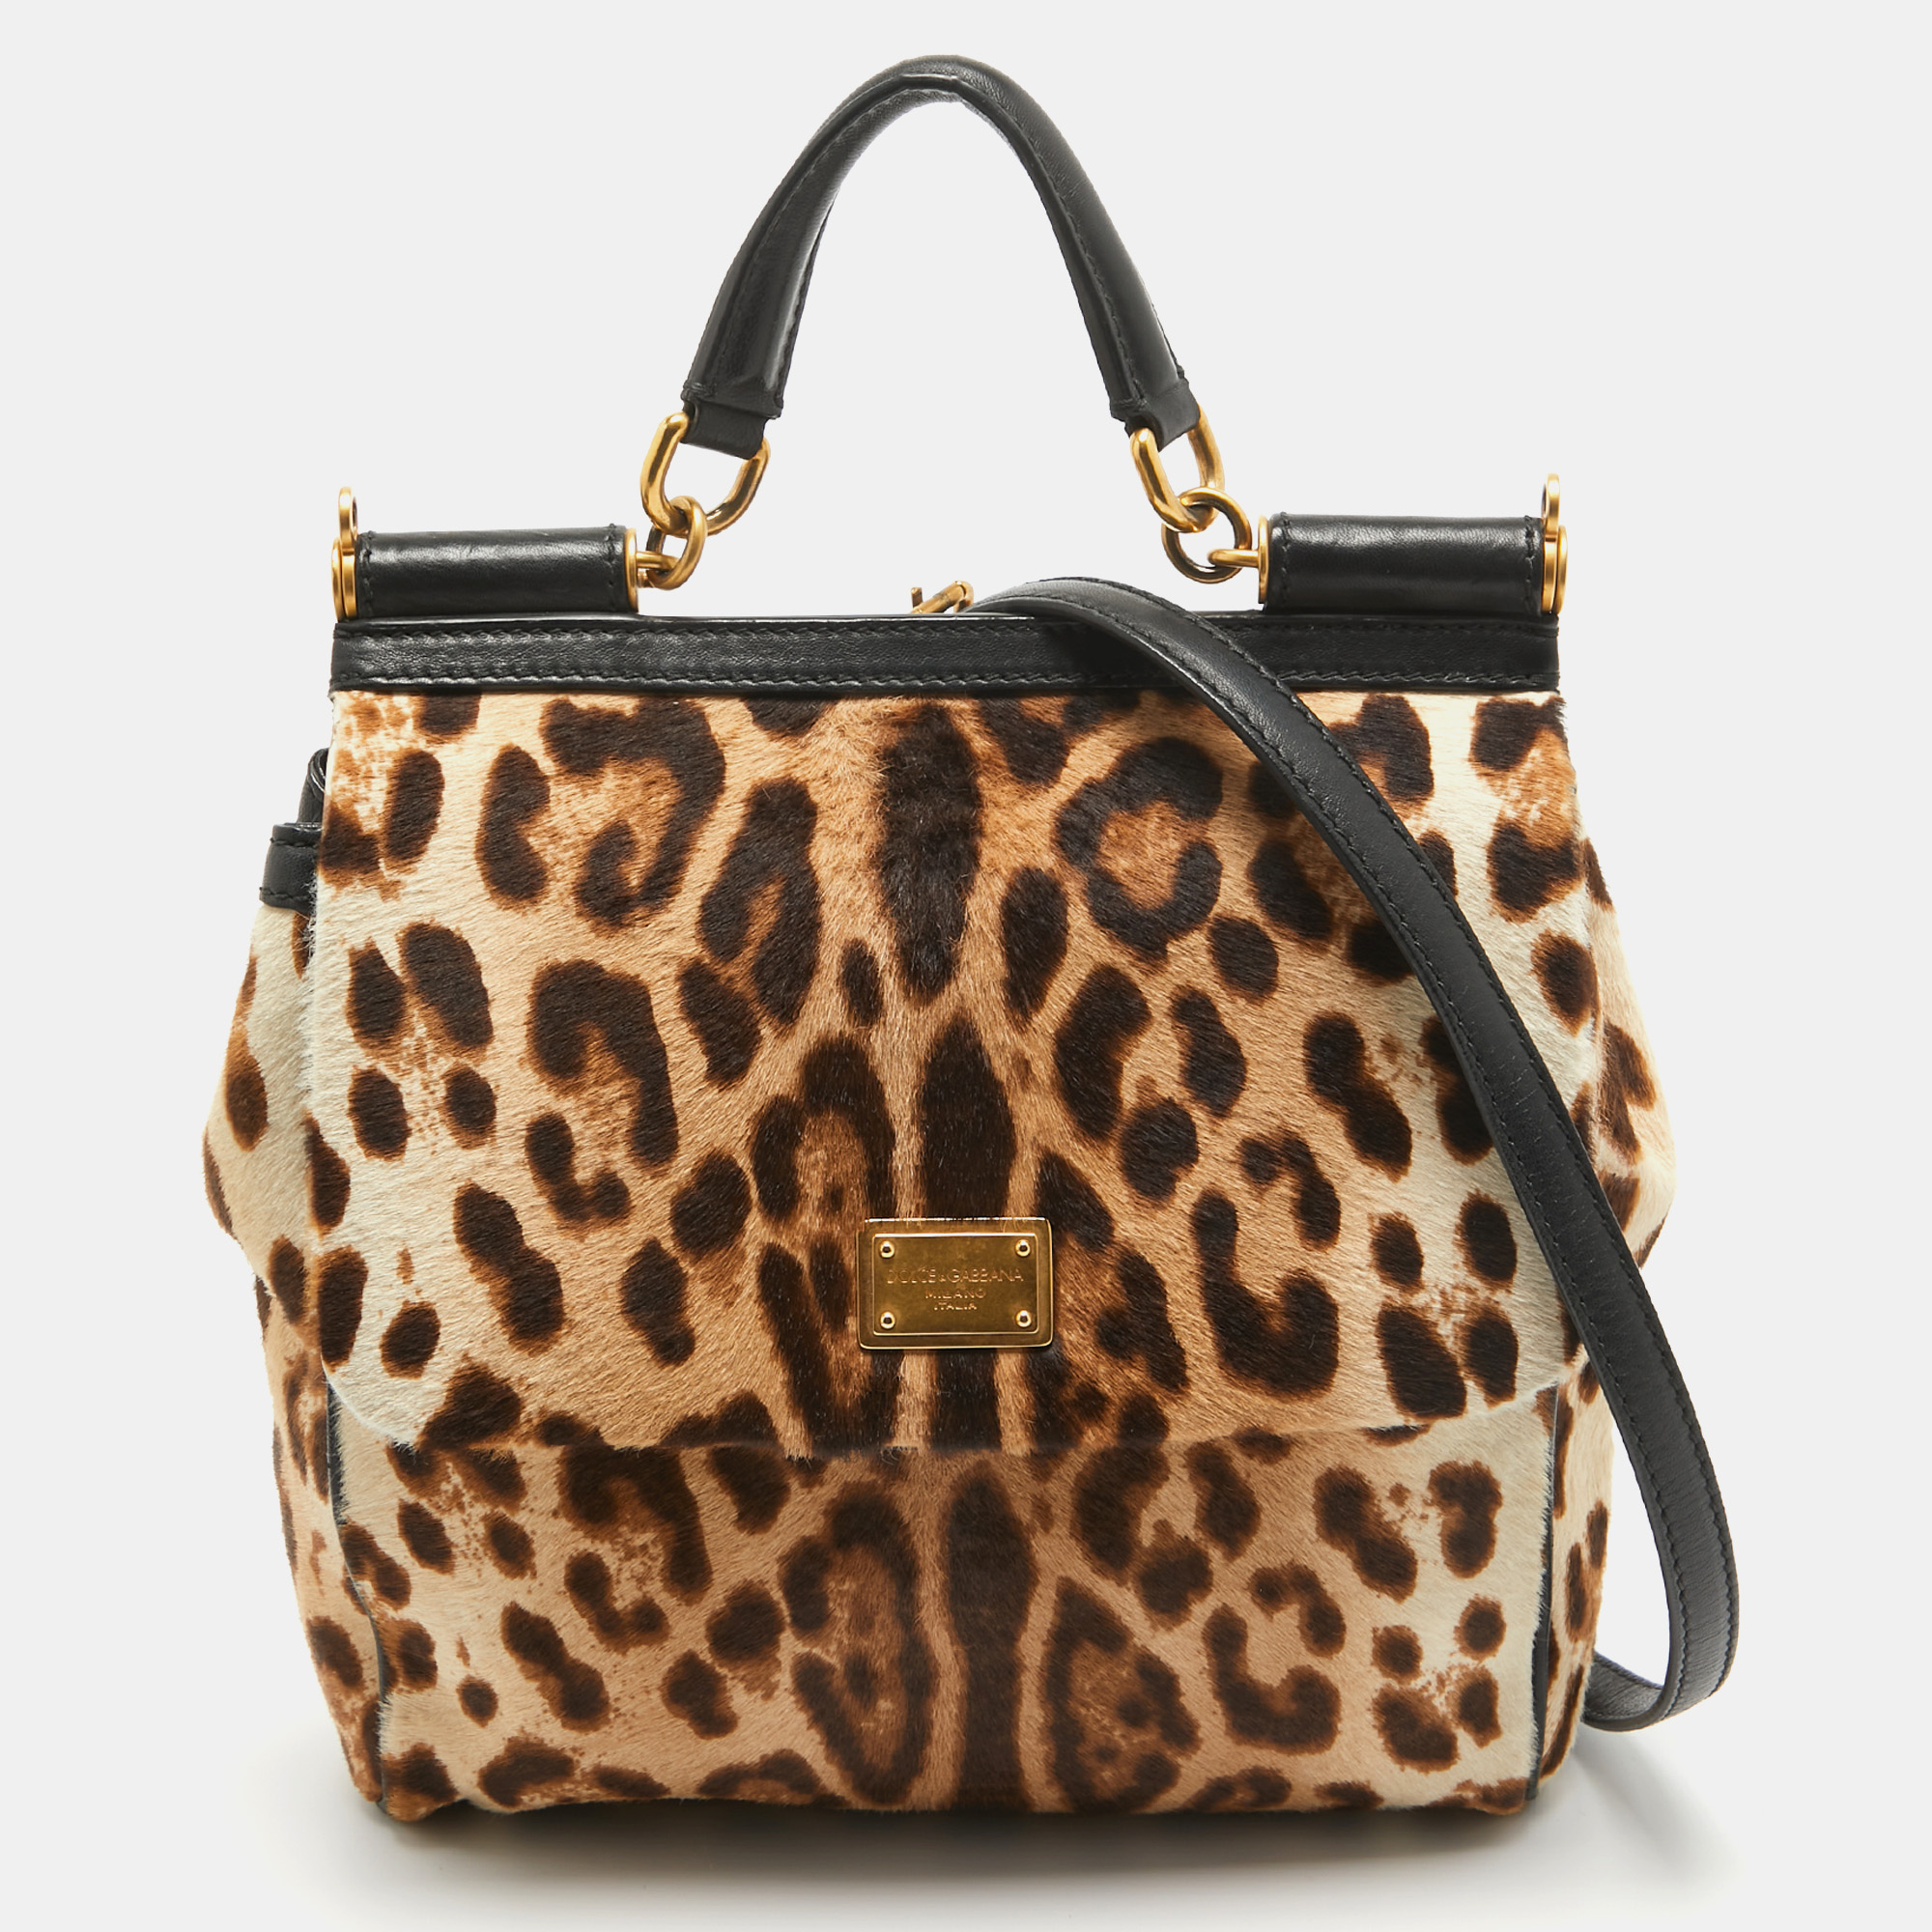 Dolce & gabbana brown/beige leopard print calfhair and leather medium sicily top handle bag